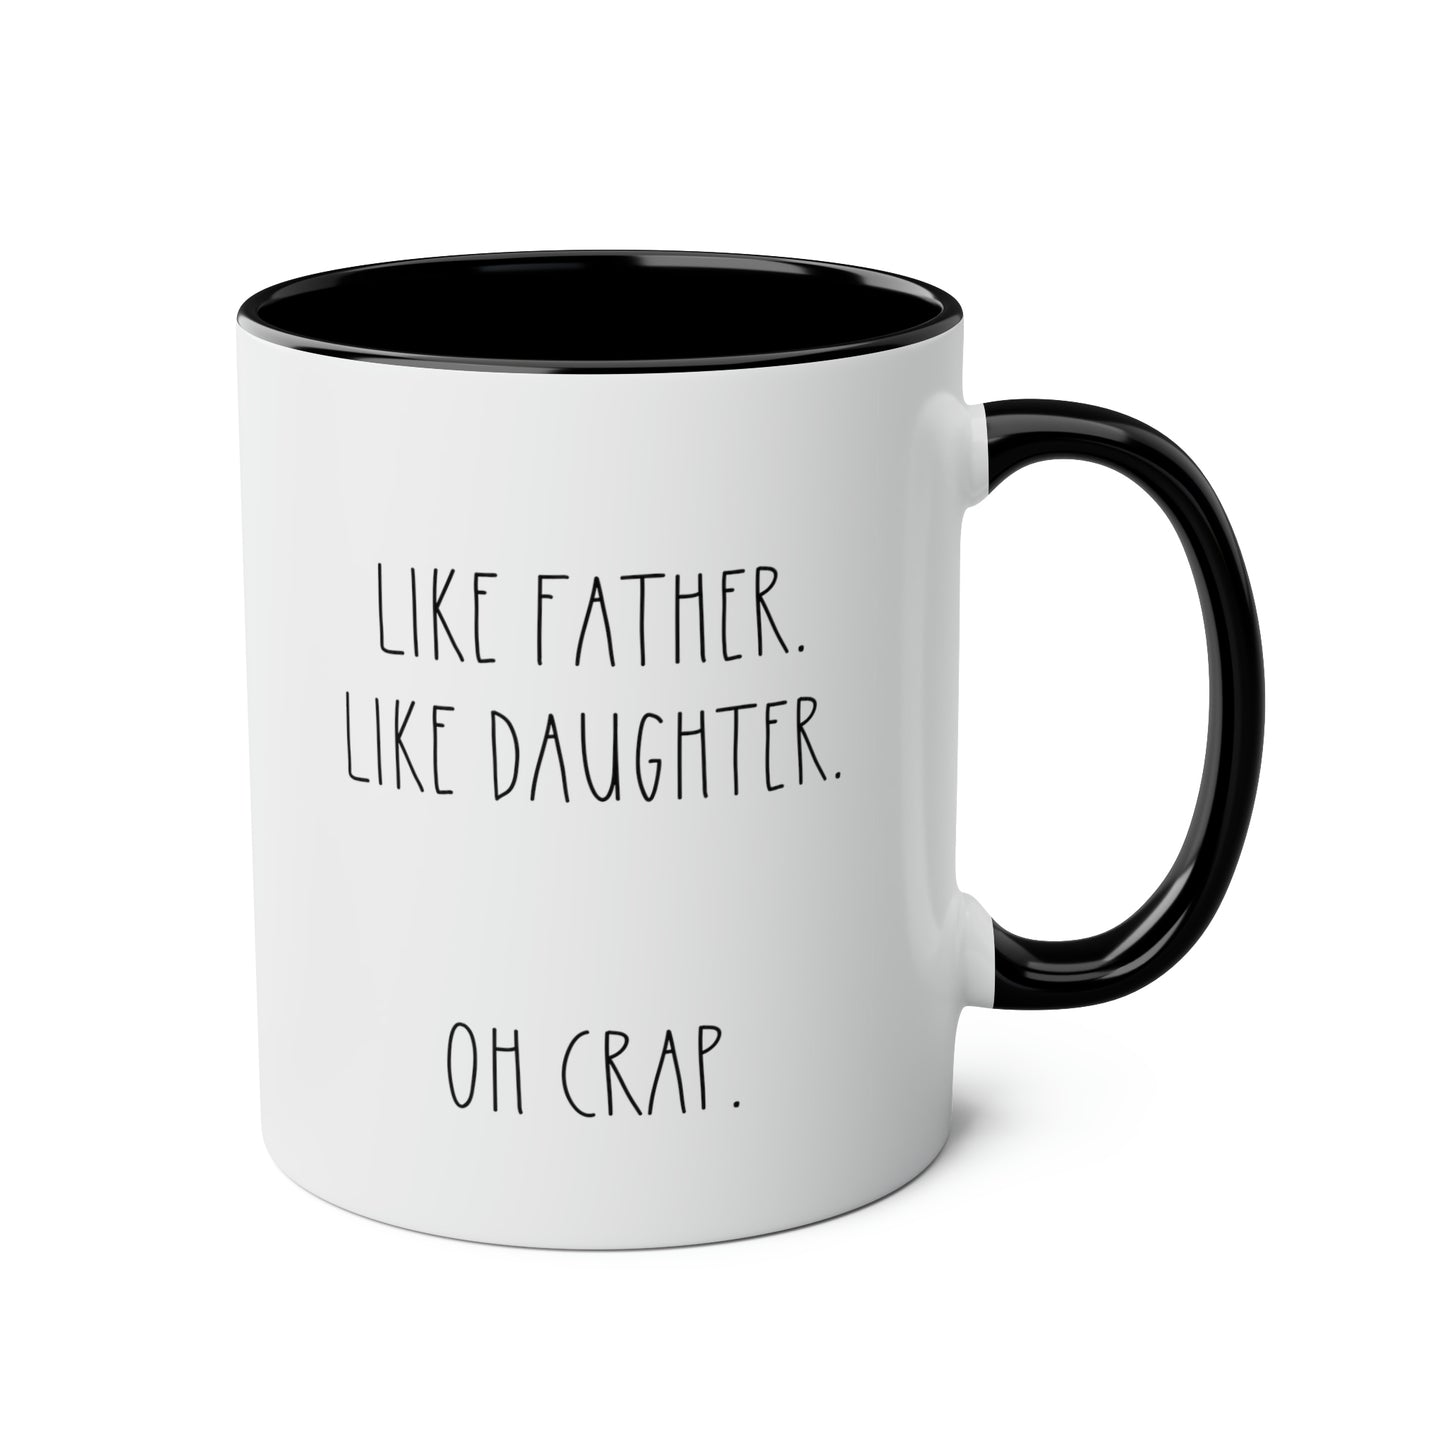 Like Father Like Daughter Oh Crap 11oz white with black accent funny large coffee mug gift for dad fathers day christmas birthday waveywares wavey wares wavywares wavy wares